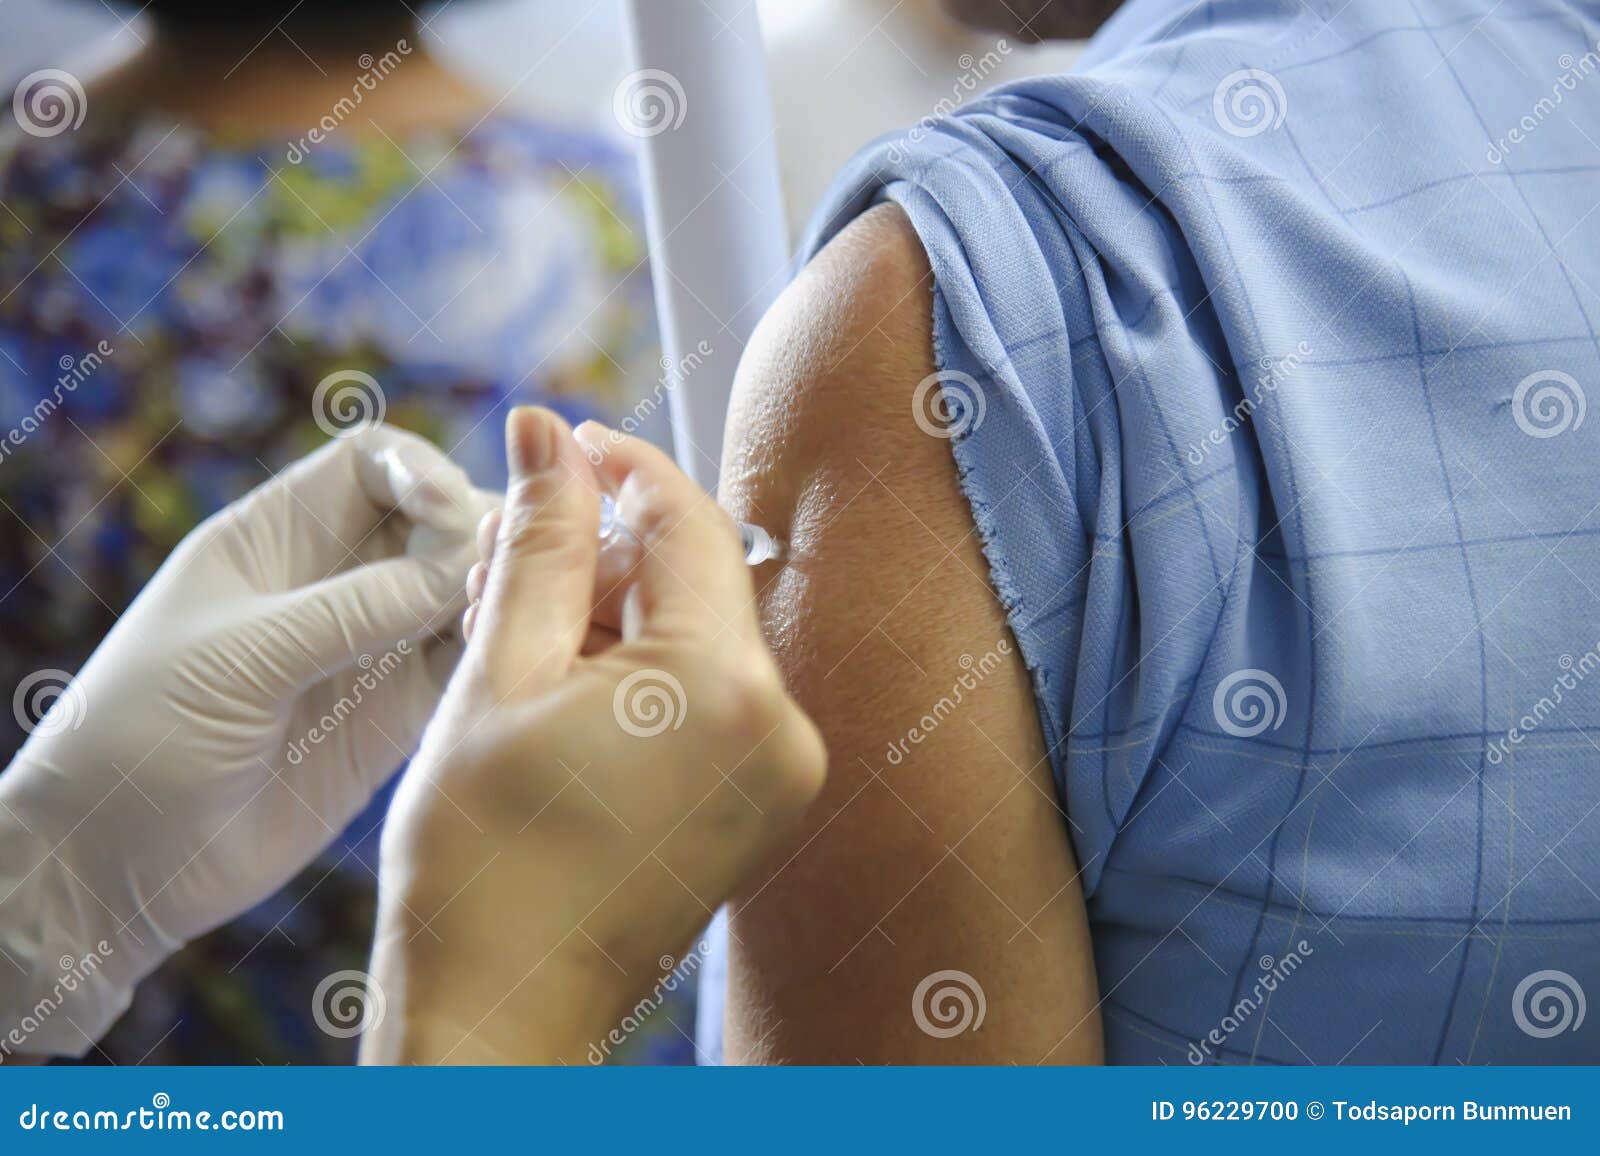 immunization vaccine injection , doctor inject vaccine to patient arm